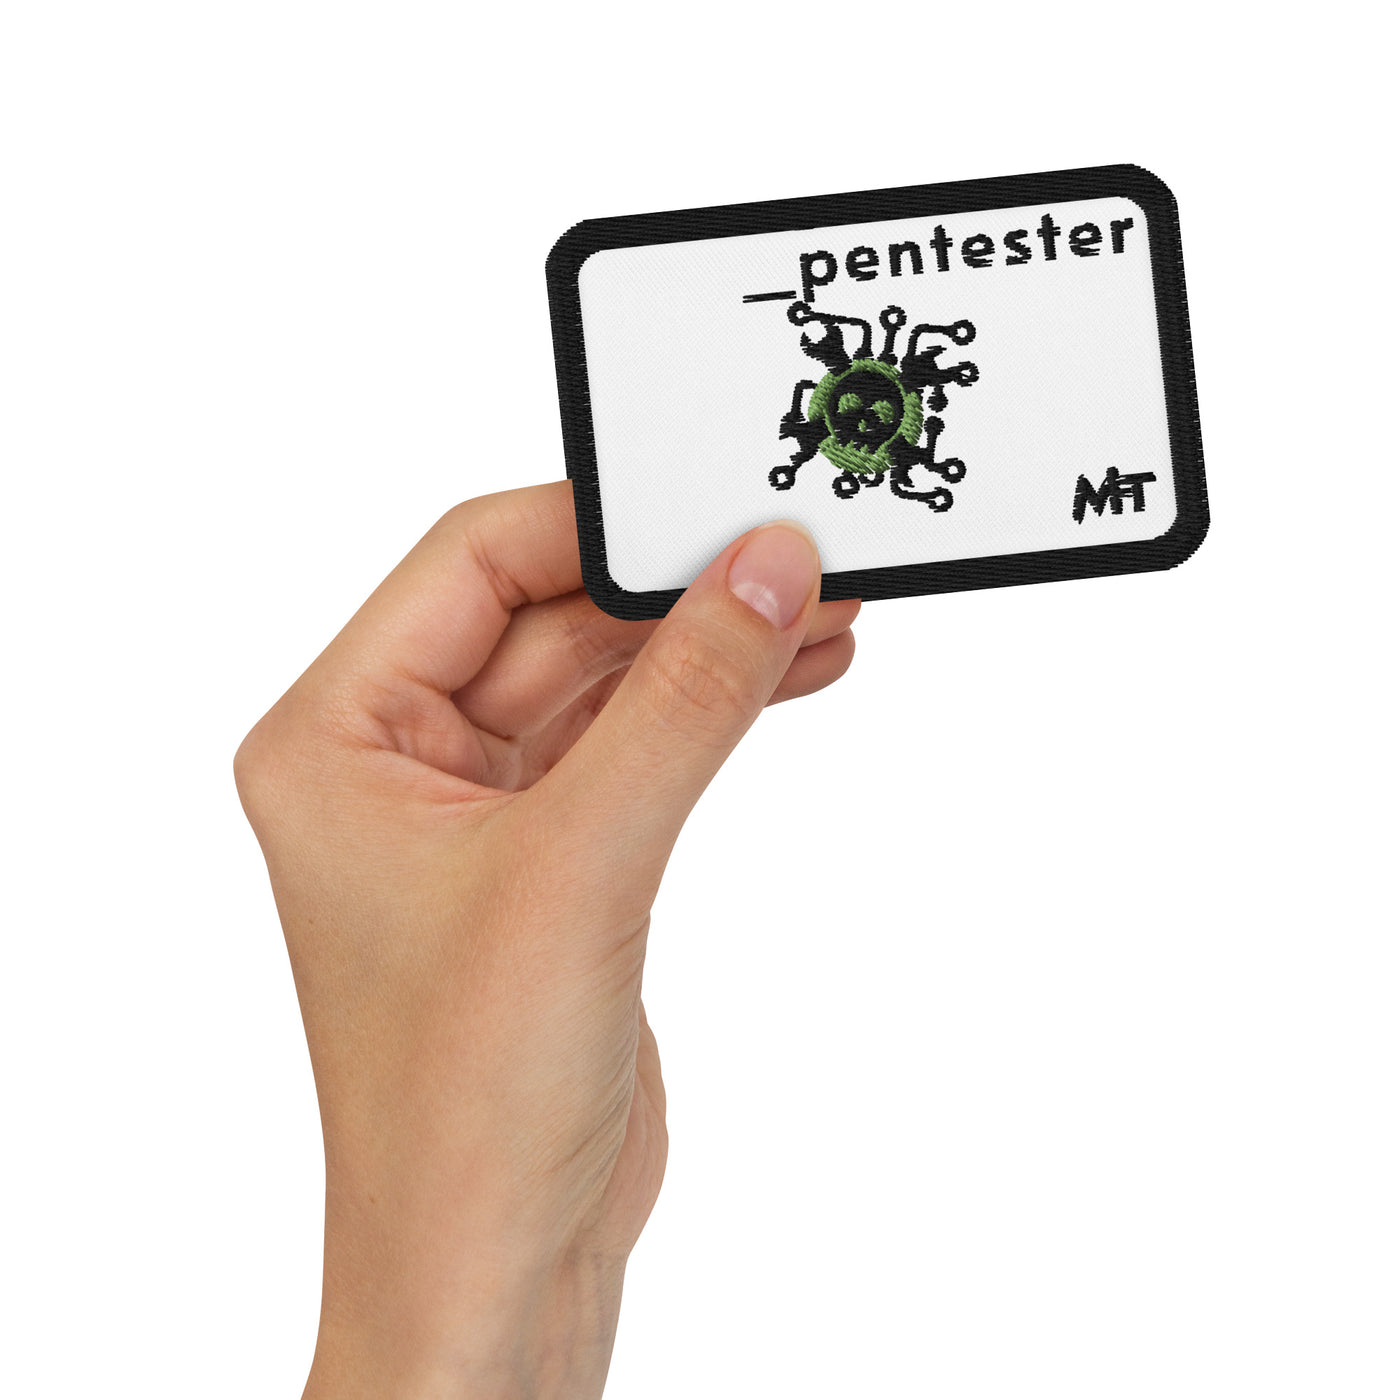 Pentester V4 - Embroidered patches